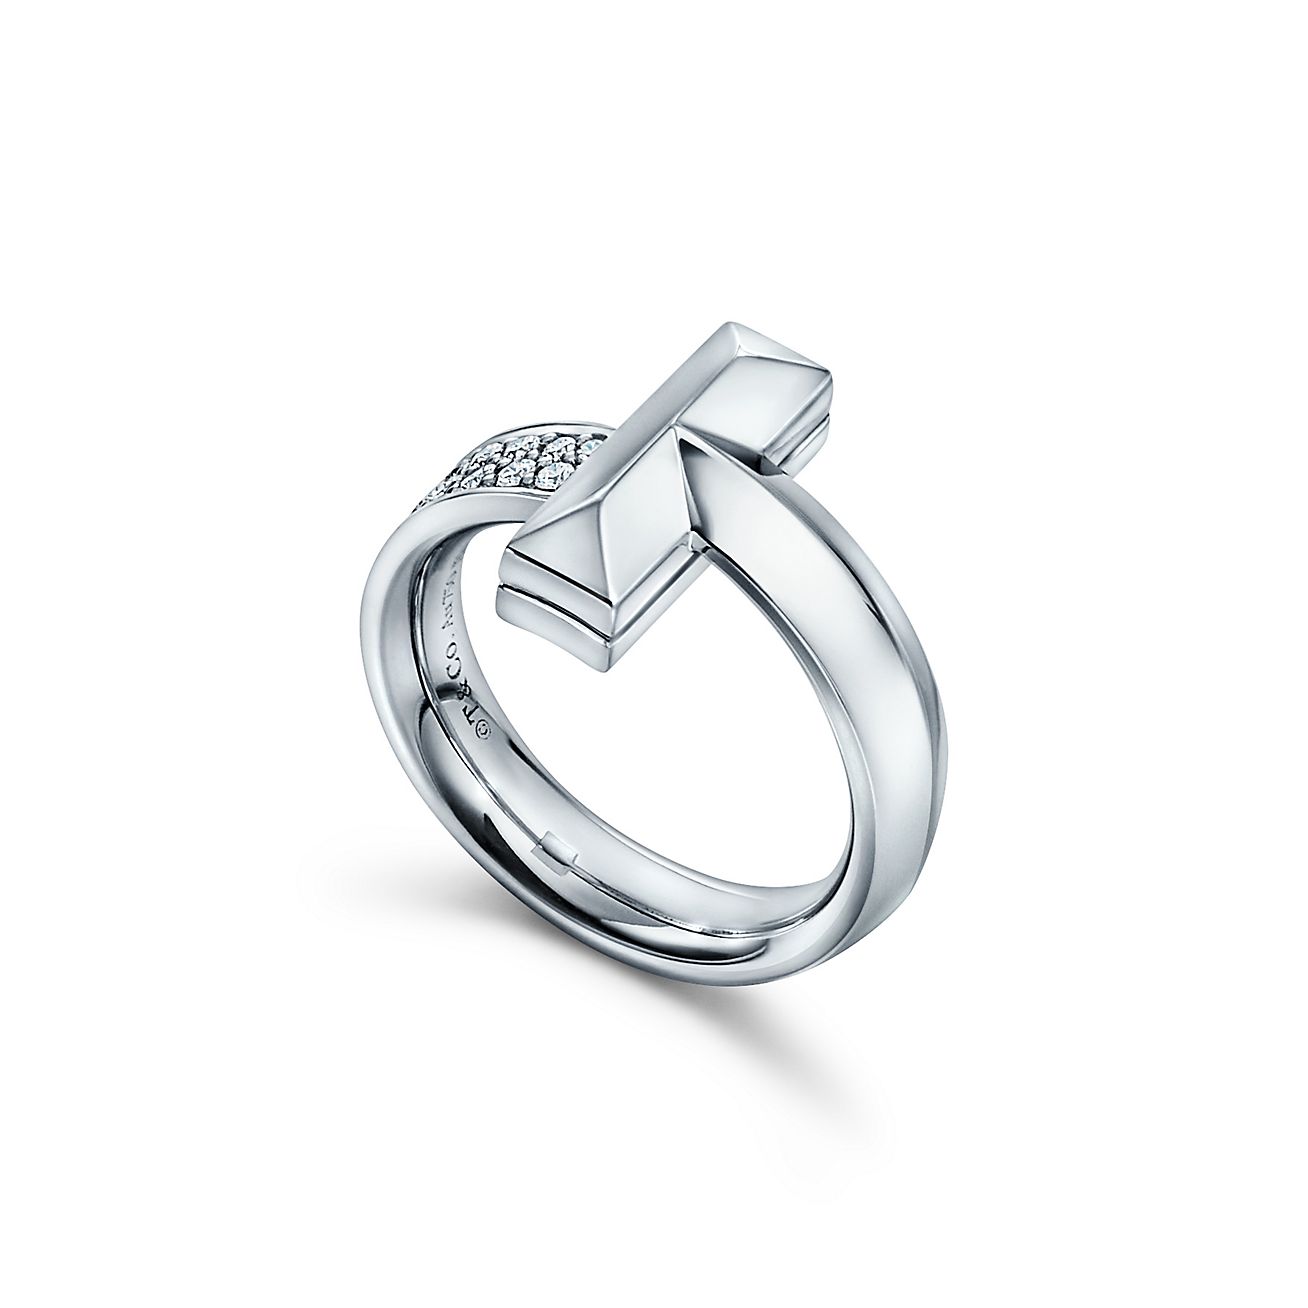 Tiffany T T1 Ring in White Gold with Diamonds, 4.5 mm Wide 